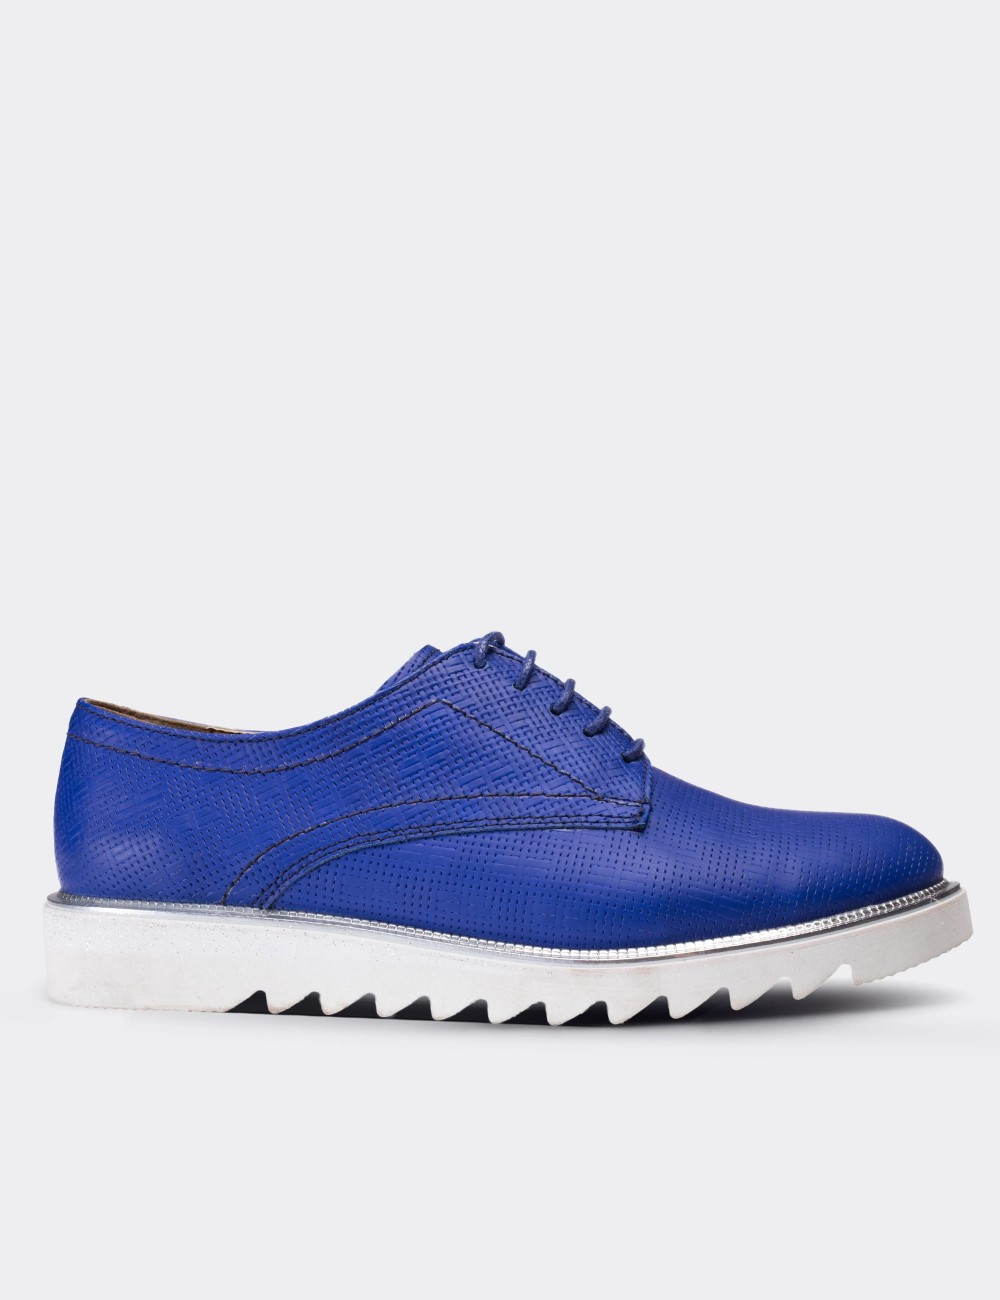 Blue  Leather Lace-up Oxford Shoes - 01430ZMVIE03